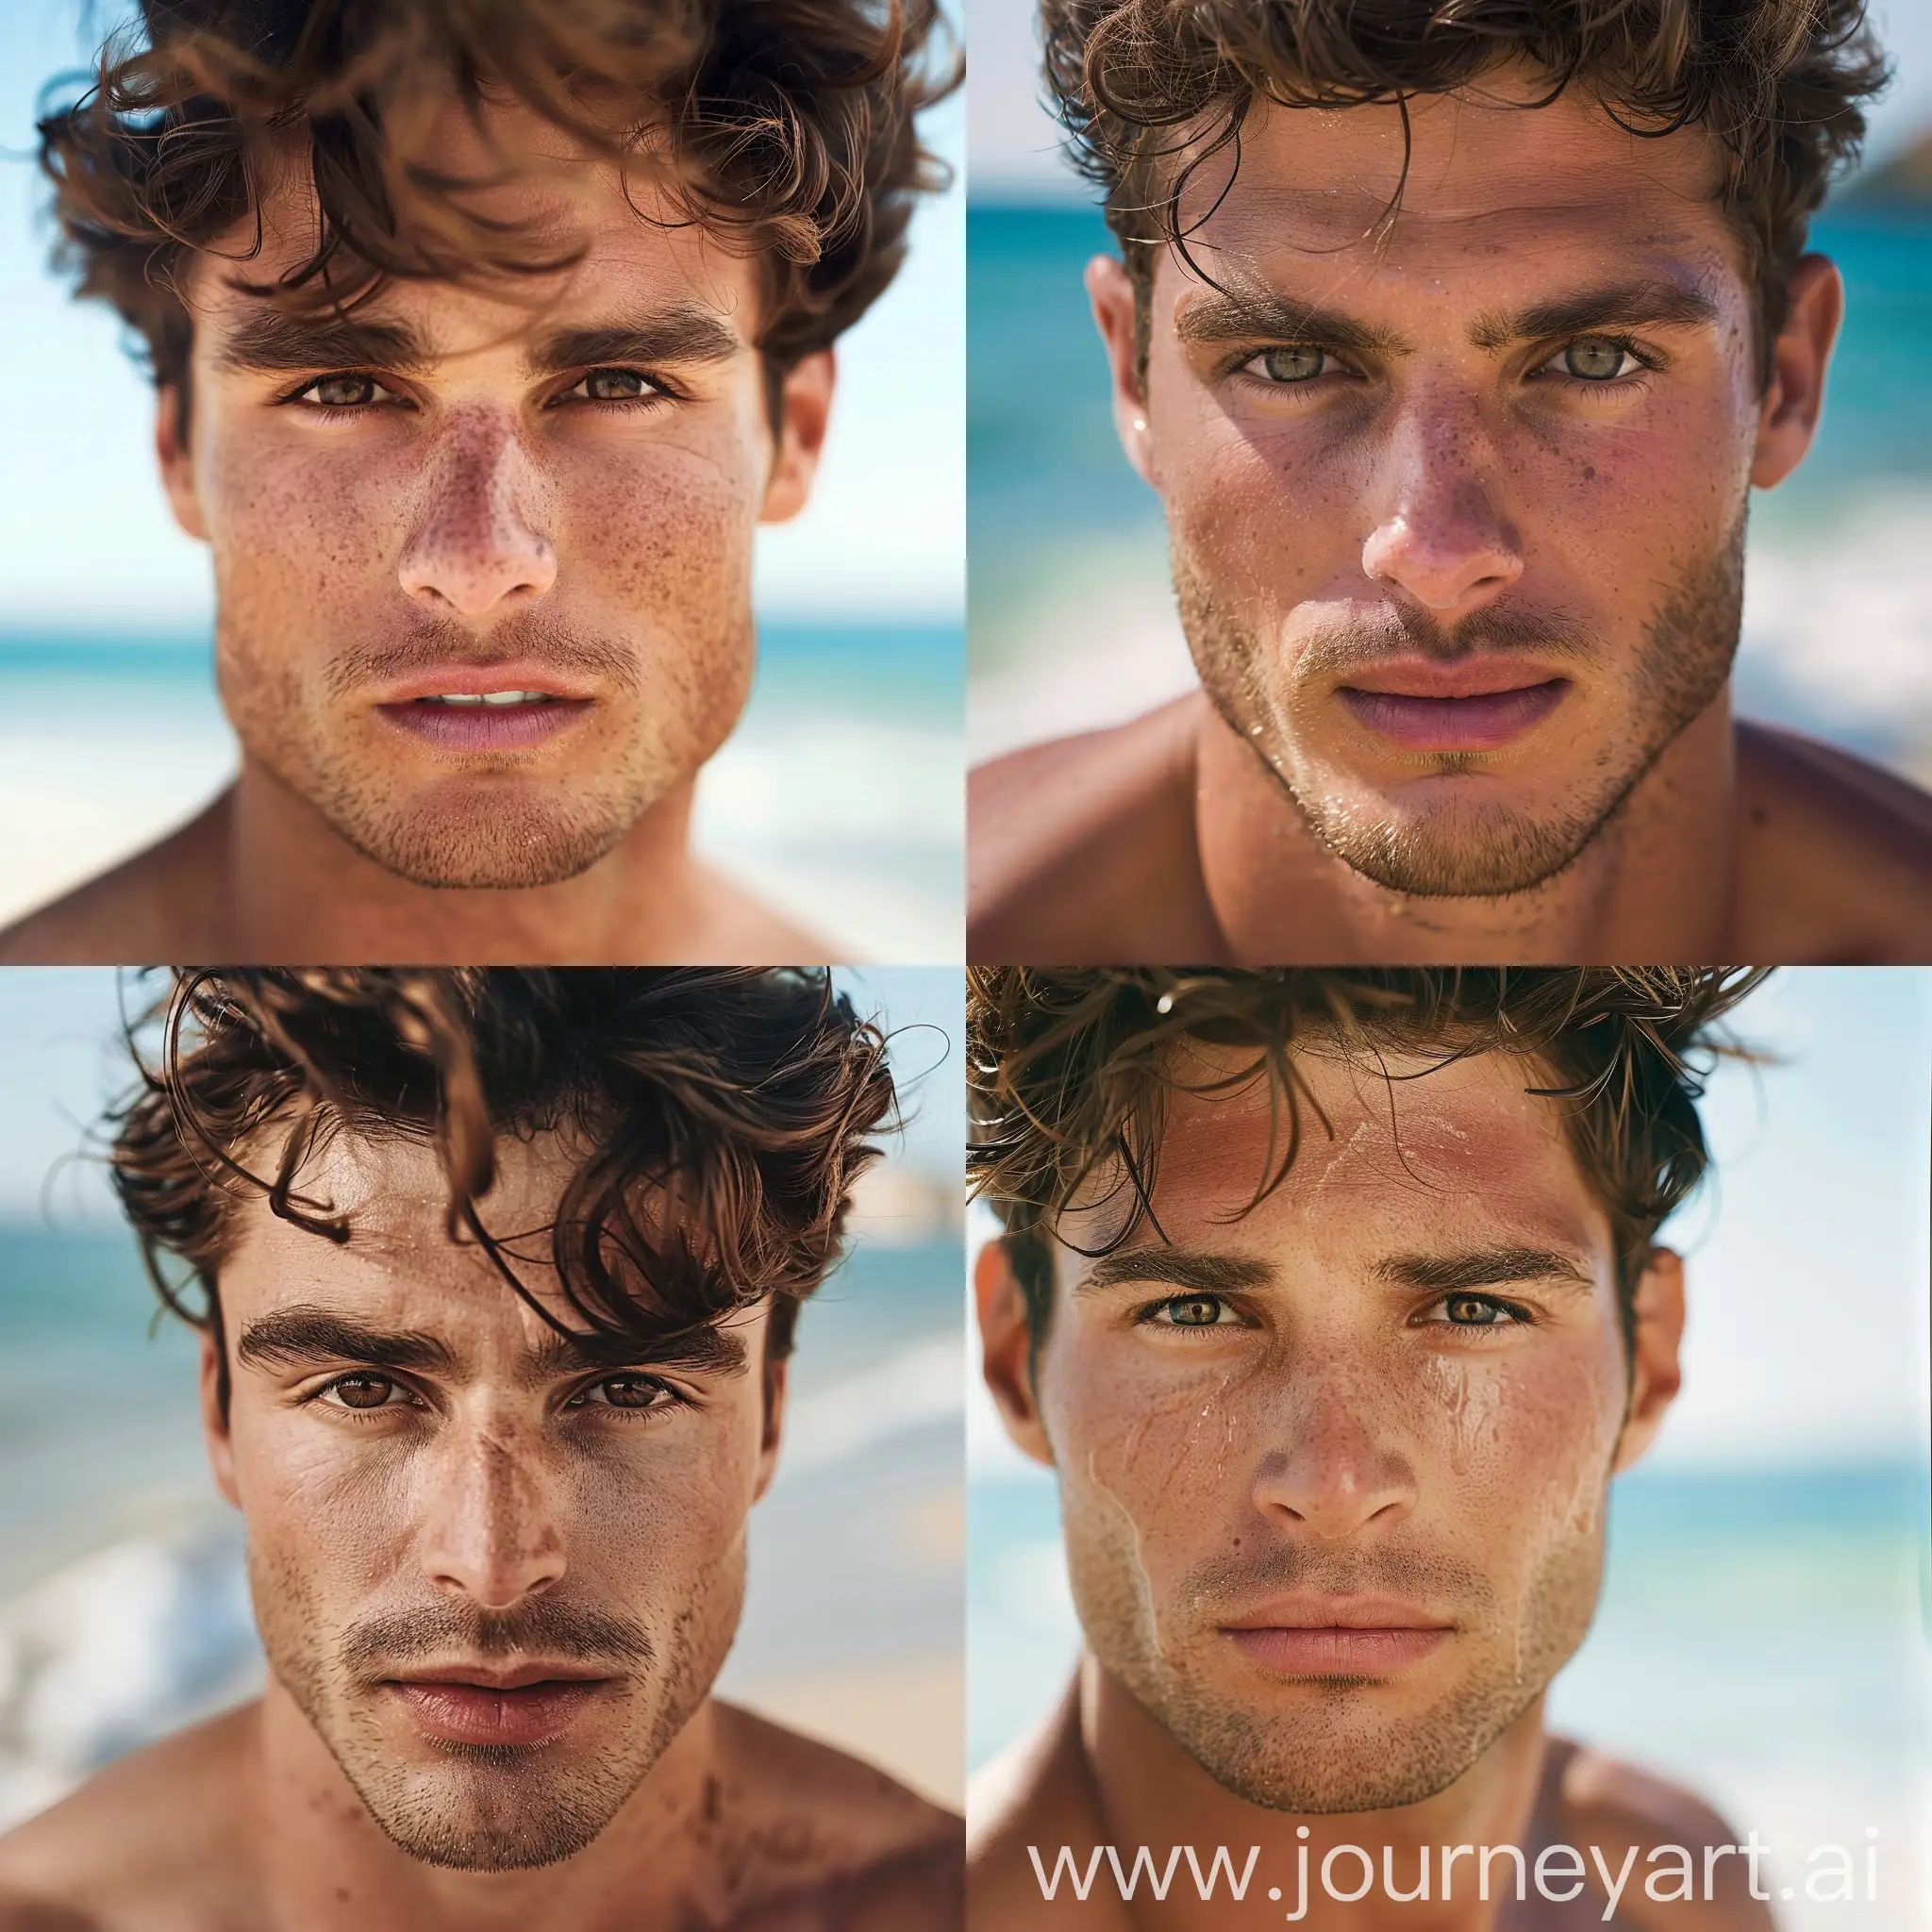 Bronzed-Muscle-Man-Enjoying-Beach-Serenity-with-SunKissed-Features